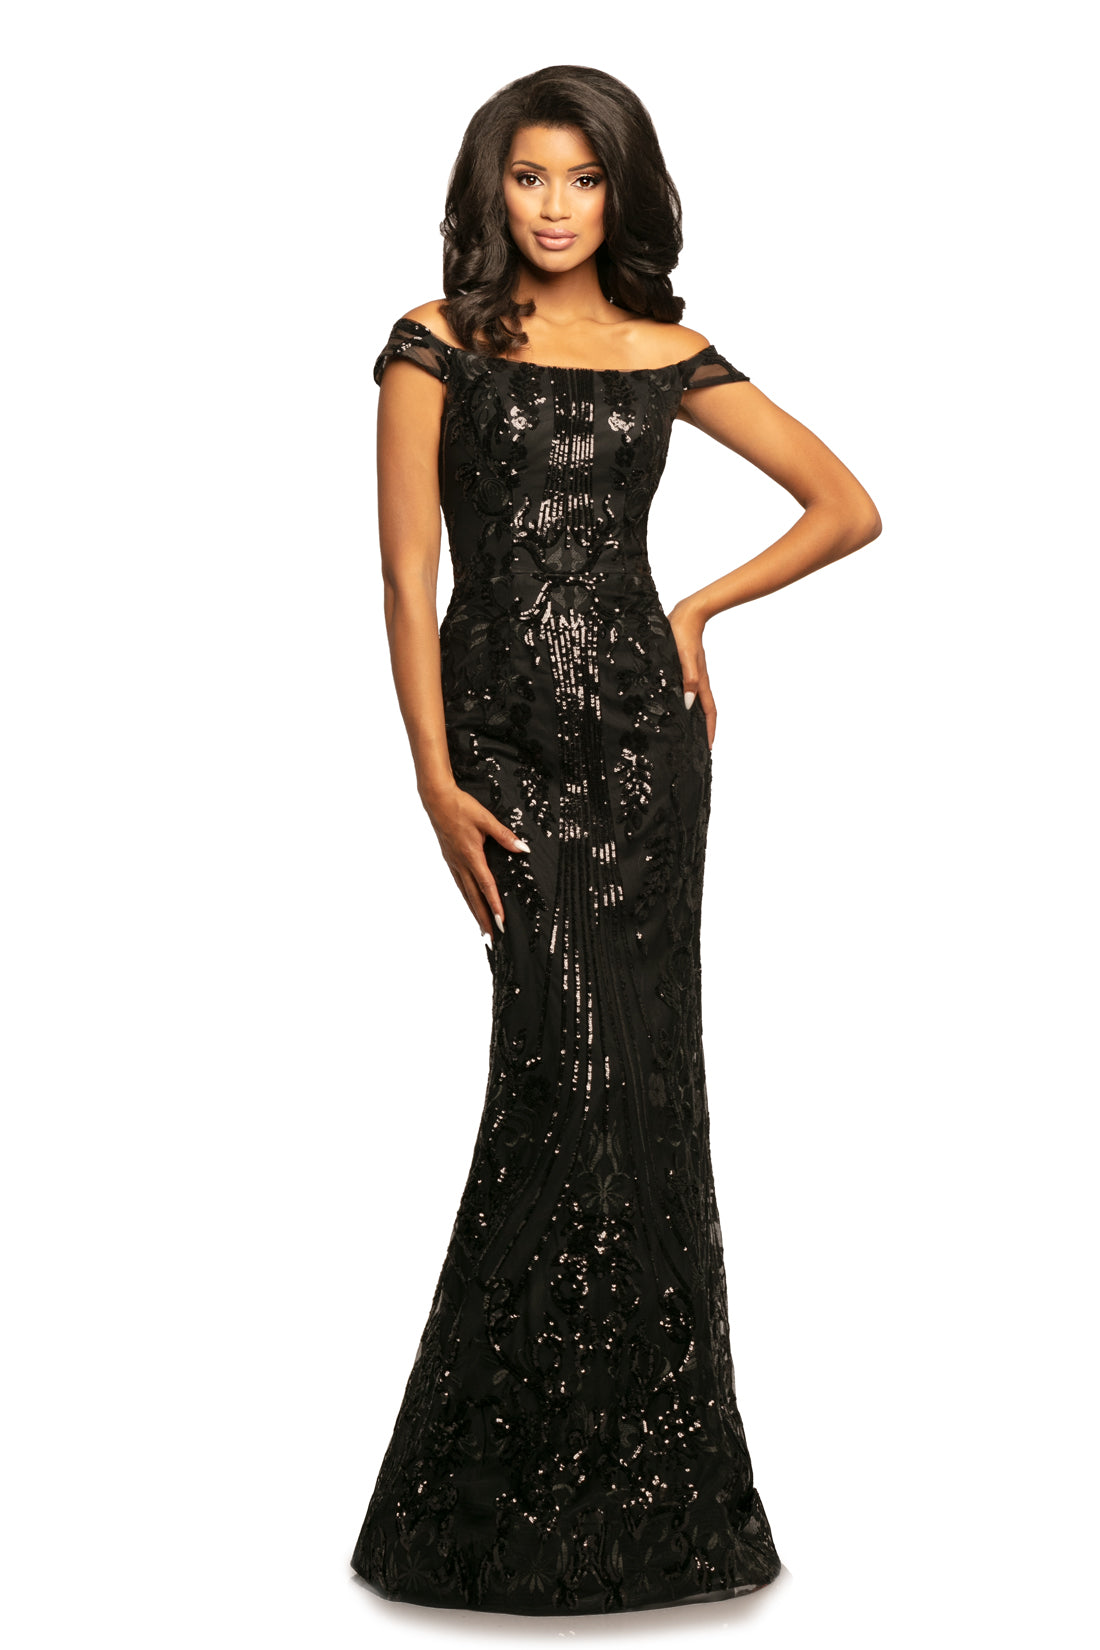 Johnathan Kayne 2064 is a Black Sequin Prom Dress, Pageant Gown & Formal Evening Wear. This long fitted gown features sequin embellishments, Off the Shoulder Straps. sheer mesh embellished back. 